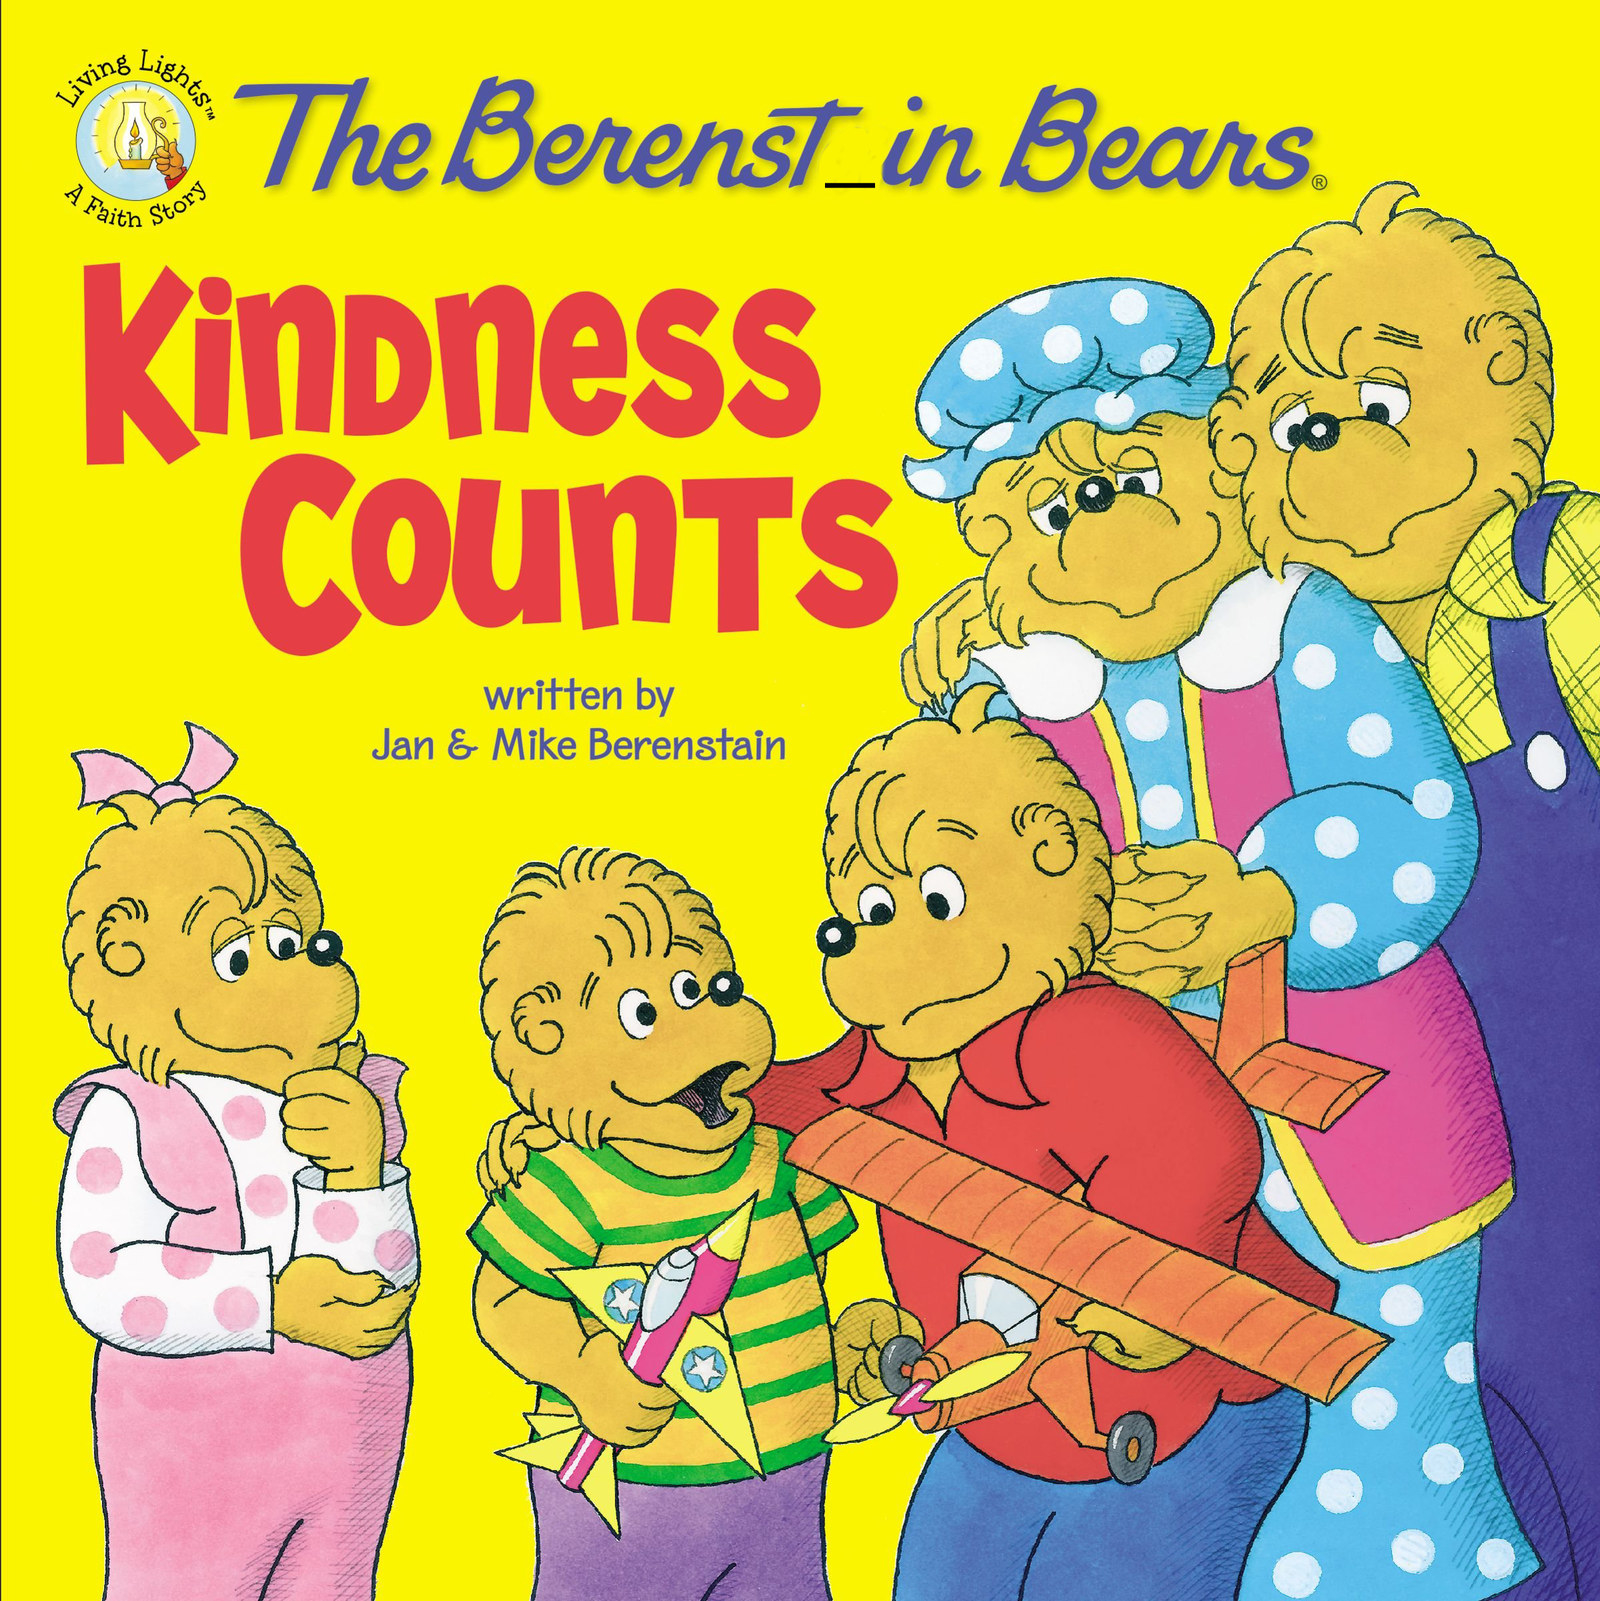 A book with the title, "The Berenst_in Bears"